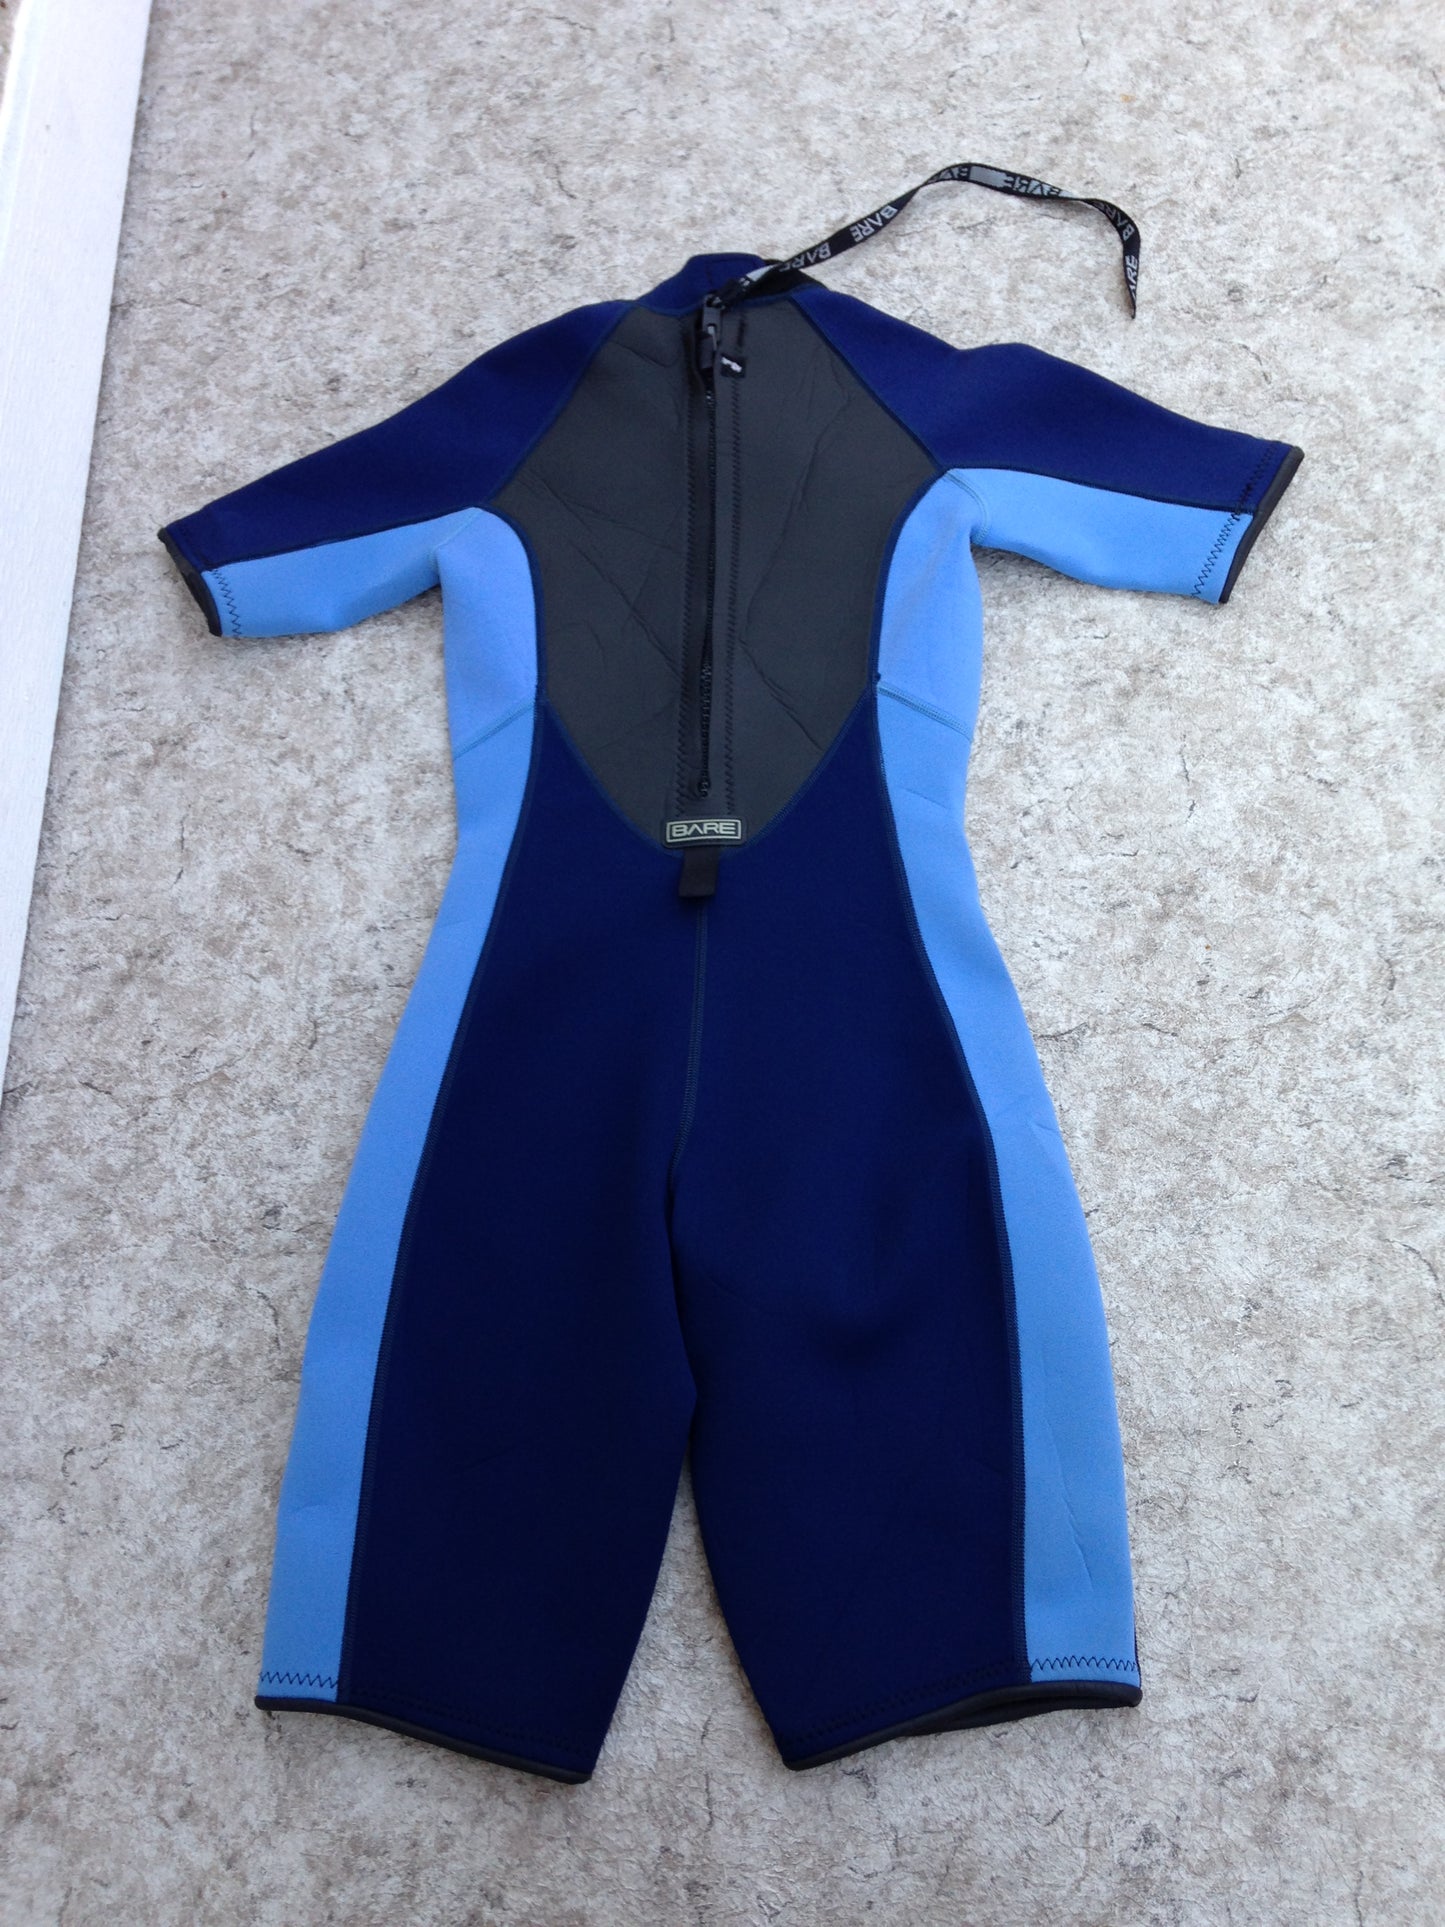 Wetsuit Ladies Size 9-10 Bare Blue on Blue 2-3 mm Neoprene Excellent As New